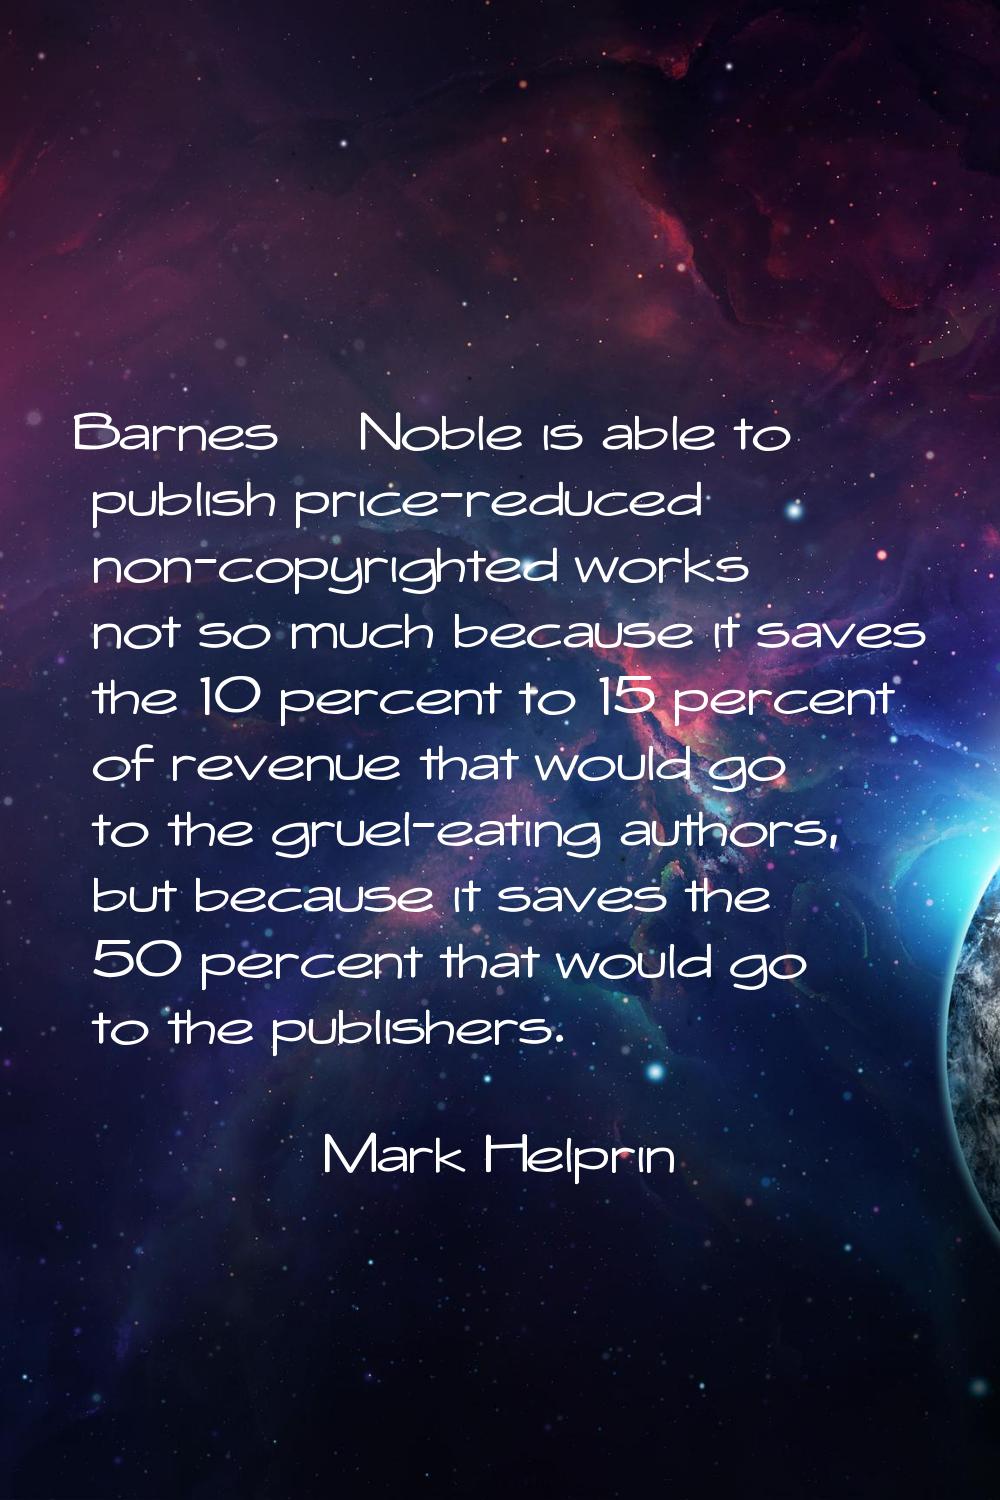 Barnes & Noble is able to publish price-reduced non-copyrighted works not so much because it saves 